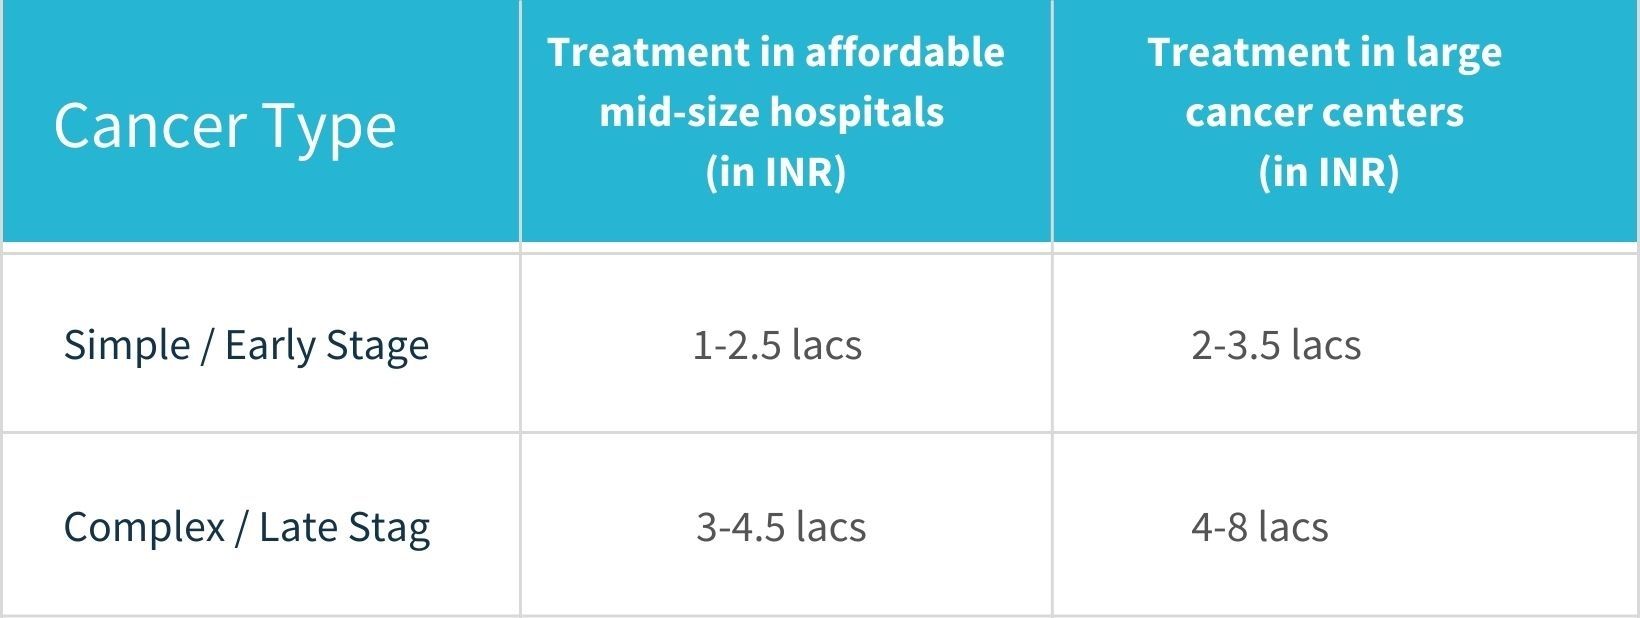 Treatment in affordable mid-size centers vs Treatment in large cancer centers (in INR)